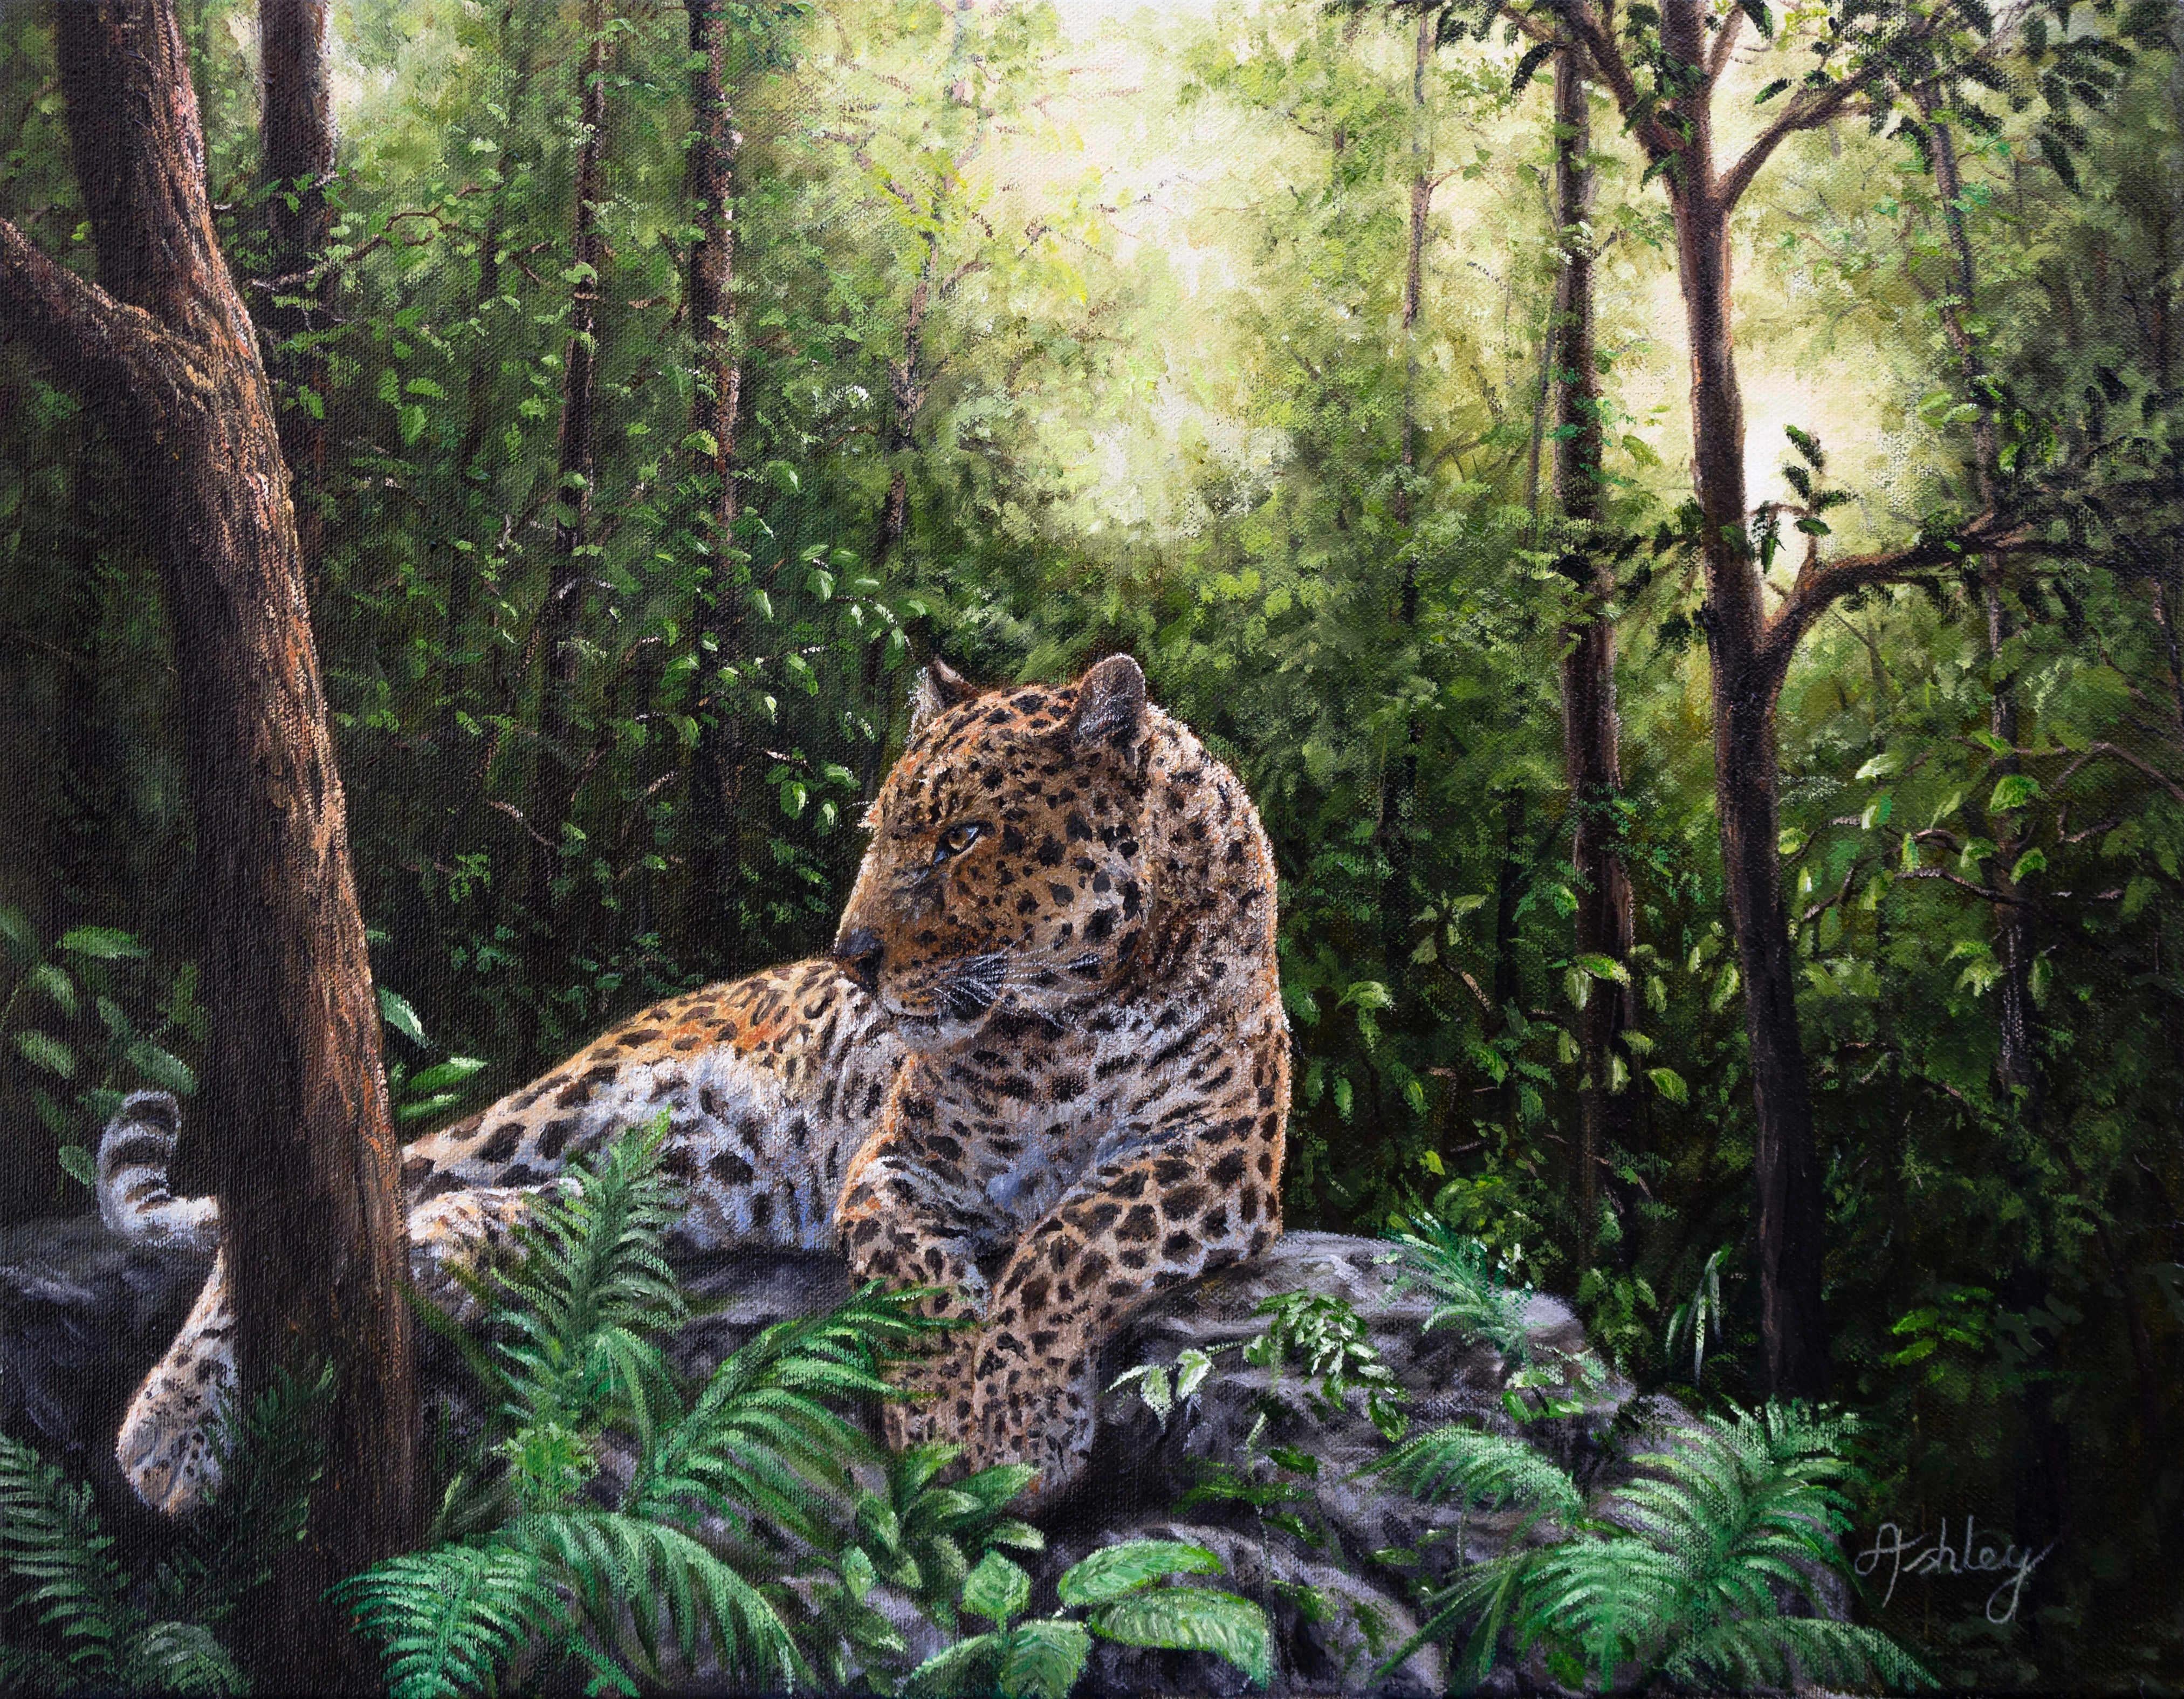 Ashley Davies Animal Painting - Leopard in the Jungle-original realism wildlife oil painting-contemporary Art